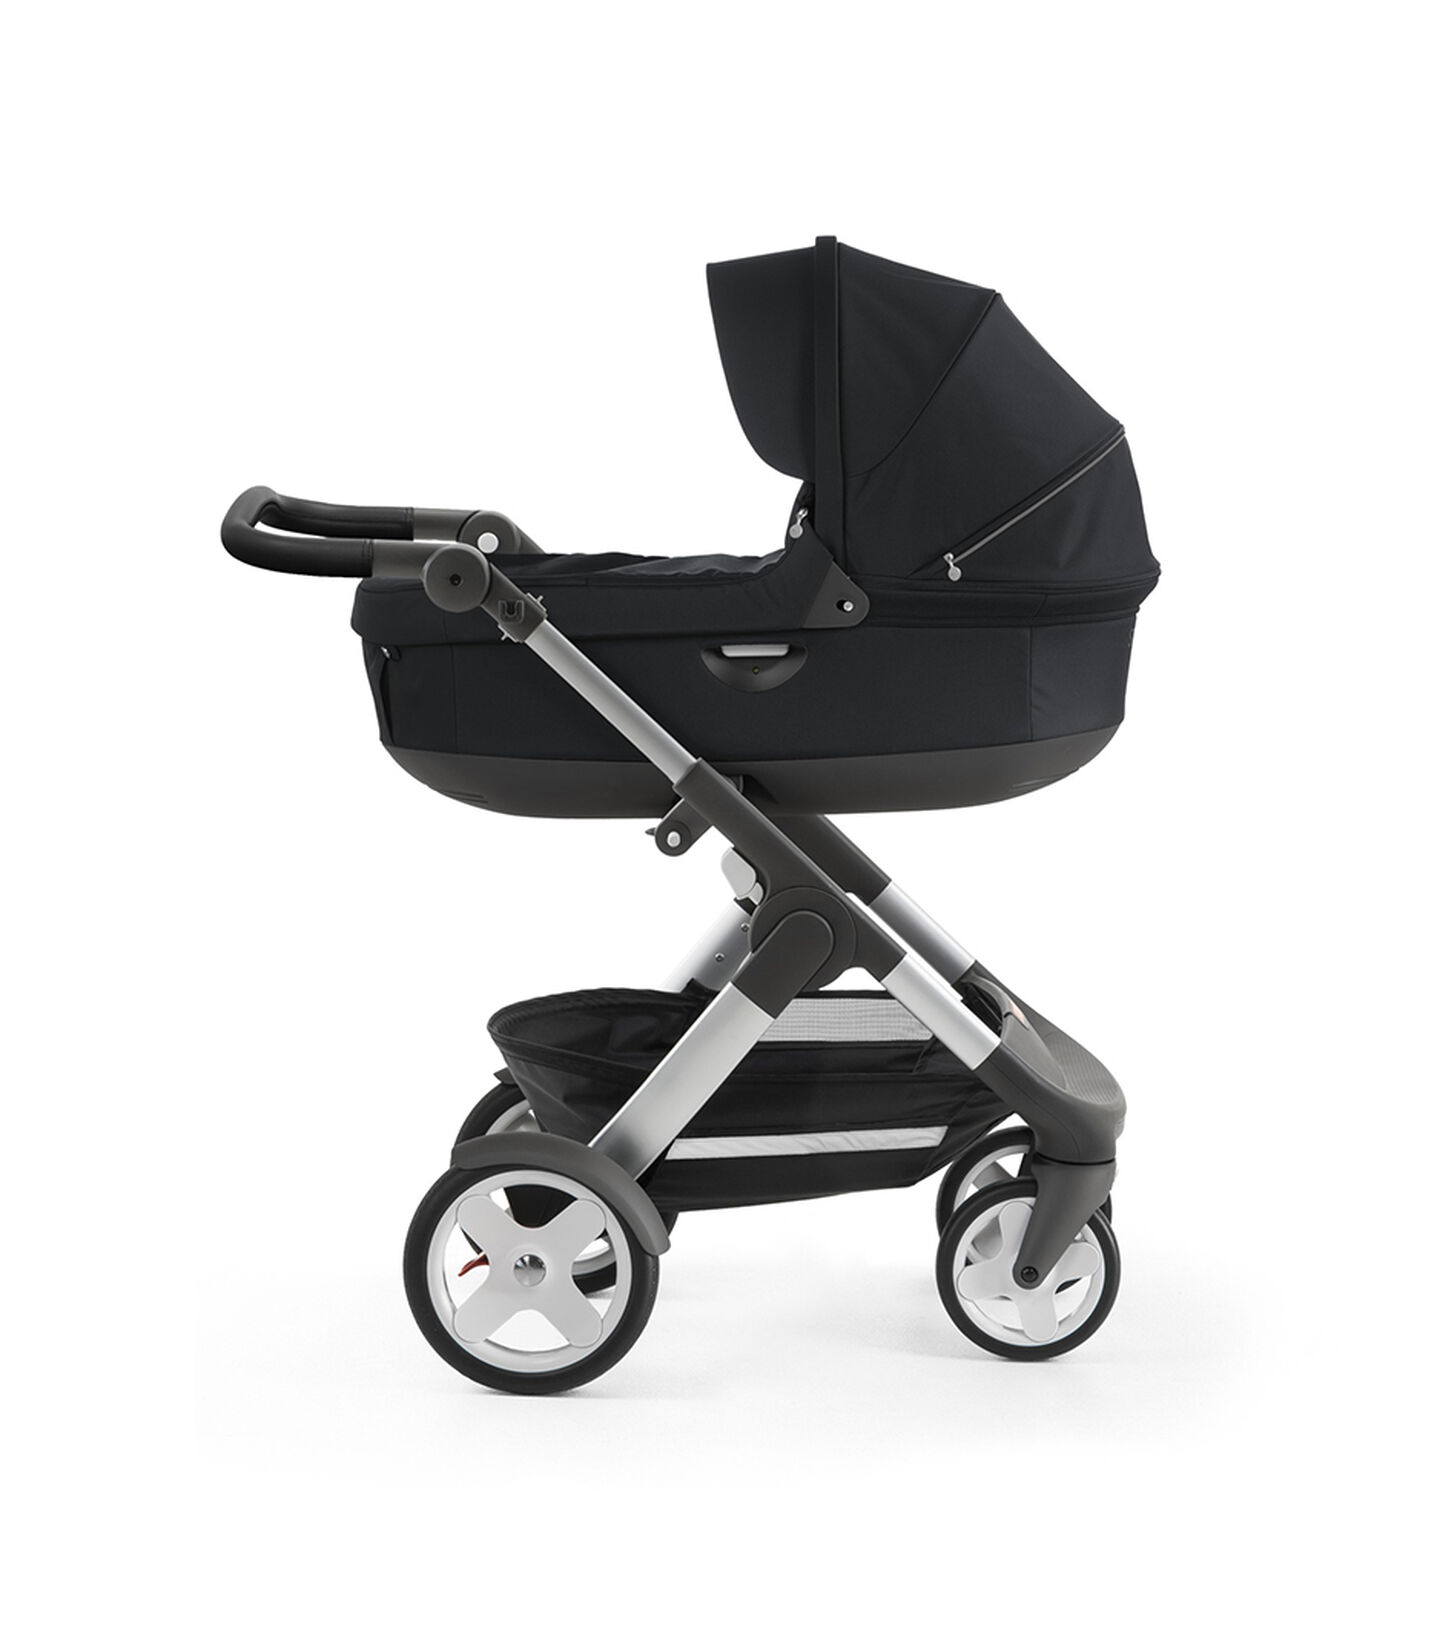 Stokke® Trailz™ with silver chassis and Stokke® Stroller Carry Cot, Black. Classic Wheels. view 2